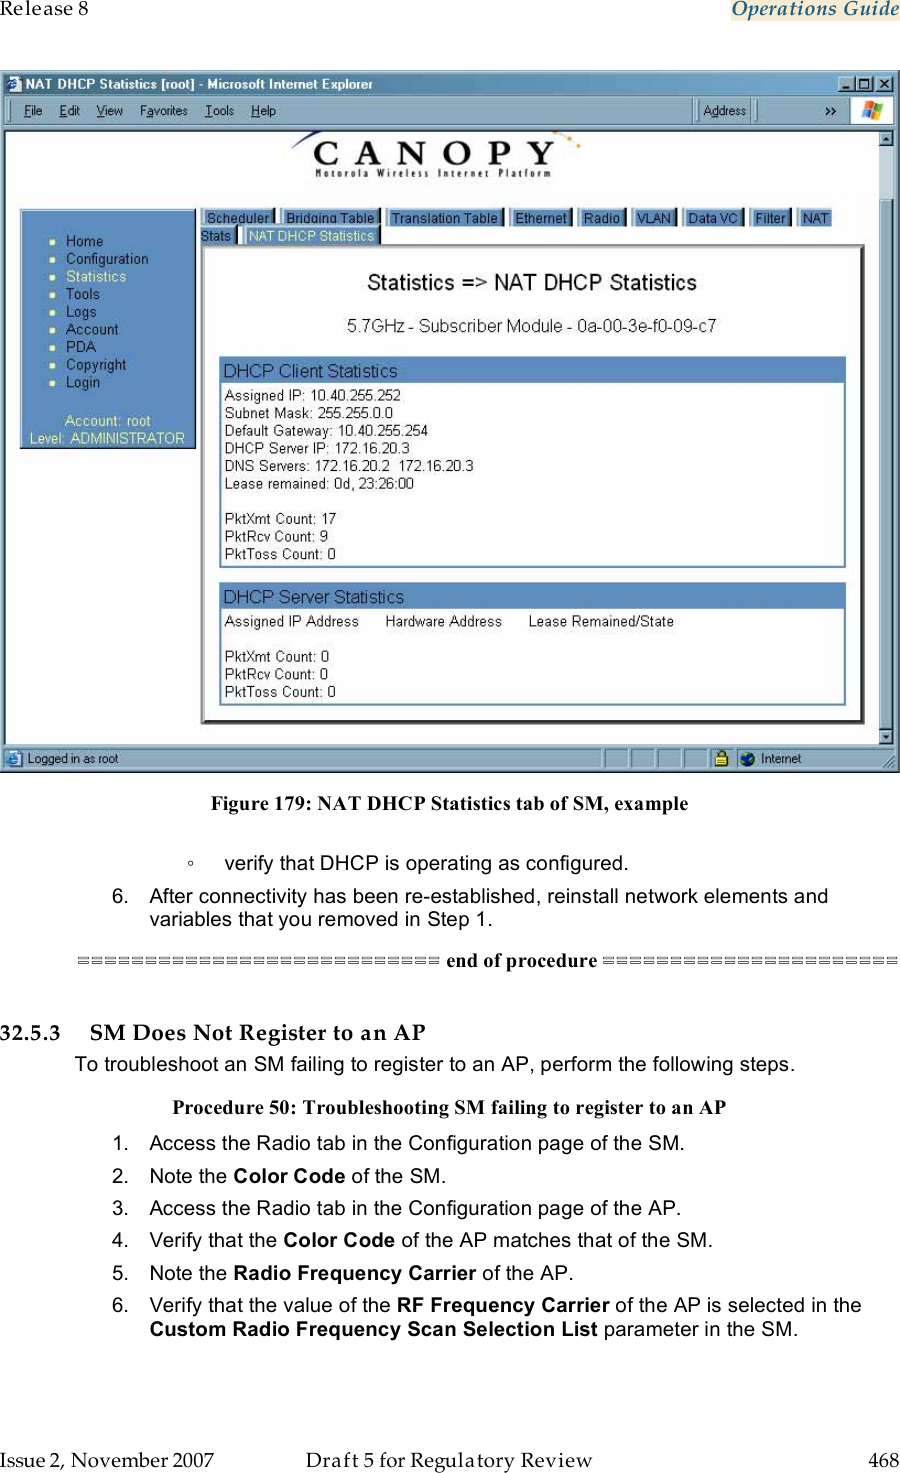 Release 8    Operations Guide   Issue 2, November 2007  Draft 5 for Regulatory Review  468      Figure 179: NAT DHCP Statistics tab of SM, example  ◦  verify that DHCP is operating as configured. 6.  After connectivity has been re-established, reinstall network elements and variables that you removed in Step 1. =========================== end of procedure ======================  32.5.3 SM Does Not Register to an AP To troubleshoot an SM failing to register to an AP, perform the following steps. Procedure 50: Troubleshooting SM failing to register to an AP 1.  Access the Radio tab in the Configuration page of the SM. 2.  Note the Color Code of the SM. 3.  Access the Radio tab in the Configuration page of the AP. 4.  Verify that the Color Code of the AP matches that of the SM. 5.  Note the Radio Frequency Carrier of the AP. 6.  Verify that the value of the RF Frequency Carrier of the AP is selected in the Custom Radio Frequency Scan Selection List parameter in the SM. 